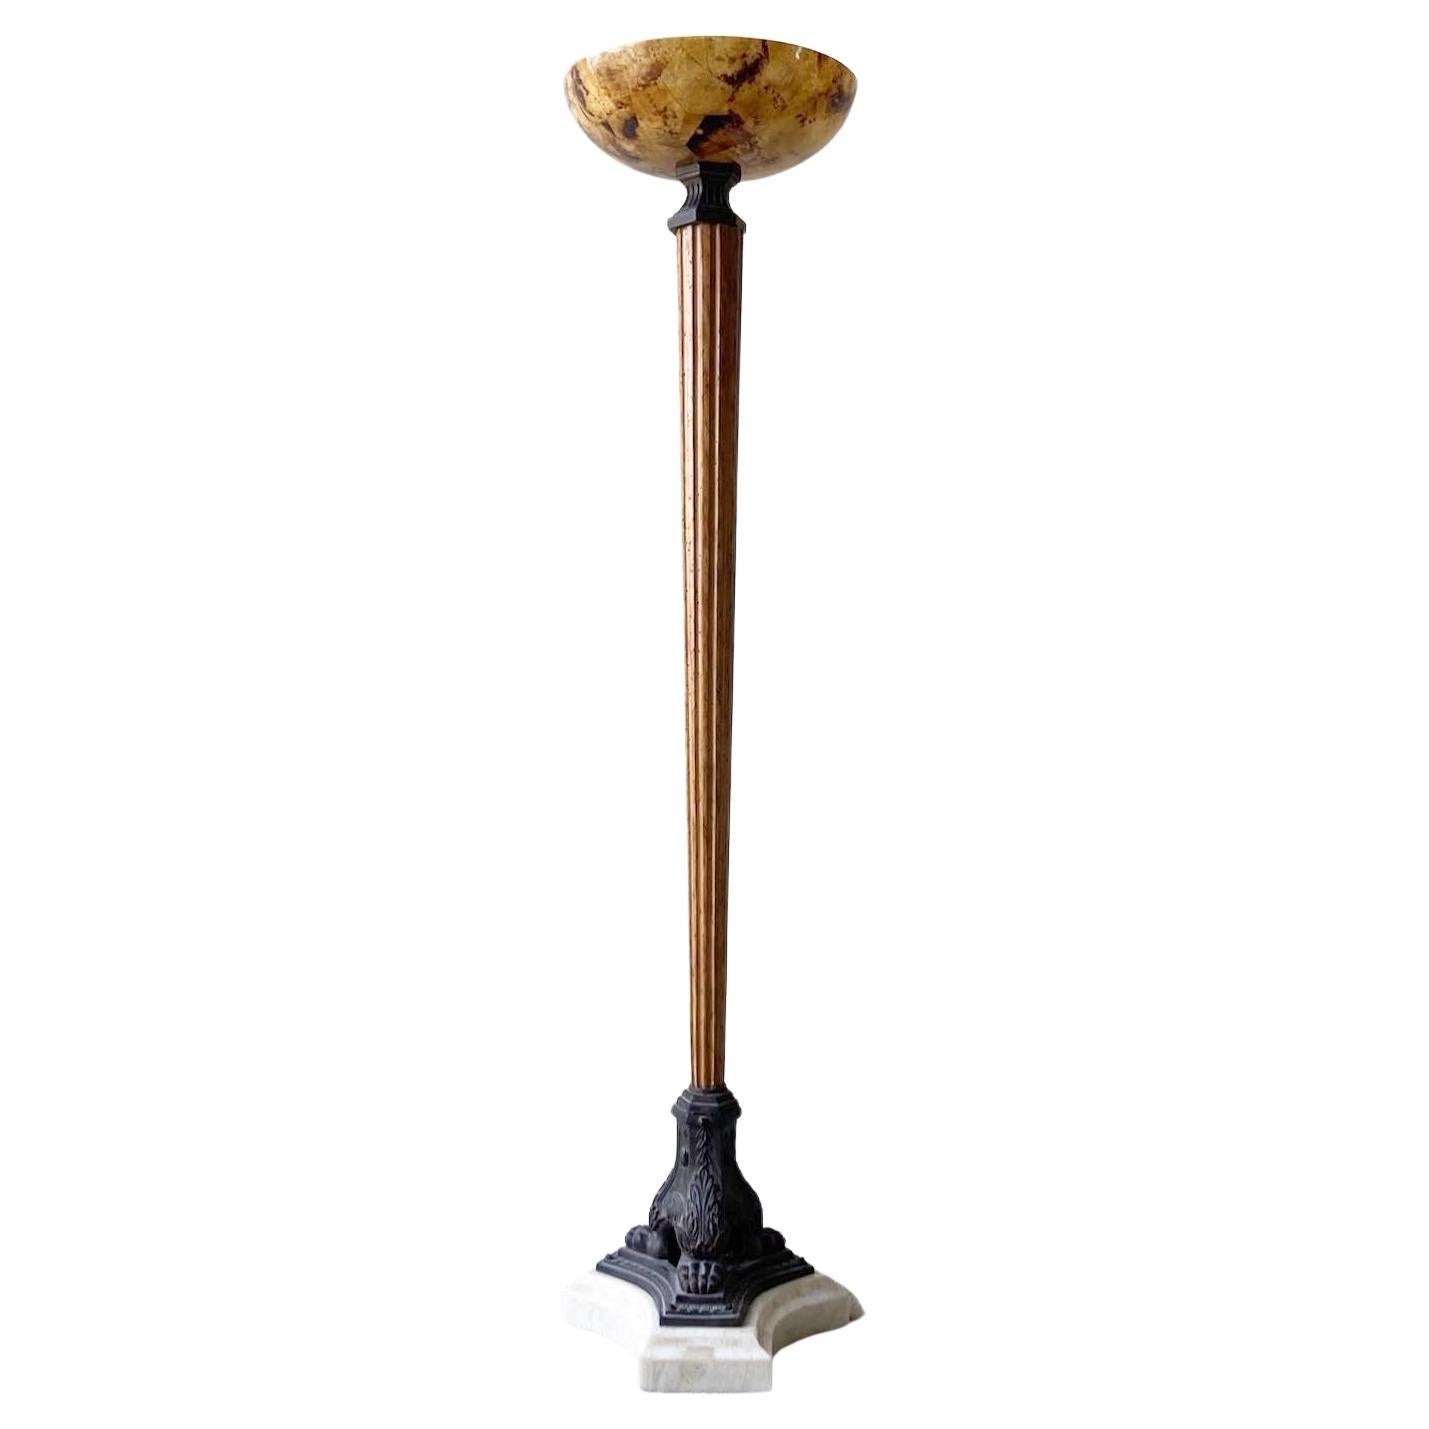 Marble and Wood Floor Lamp